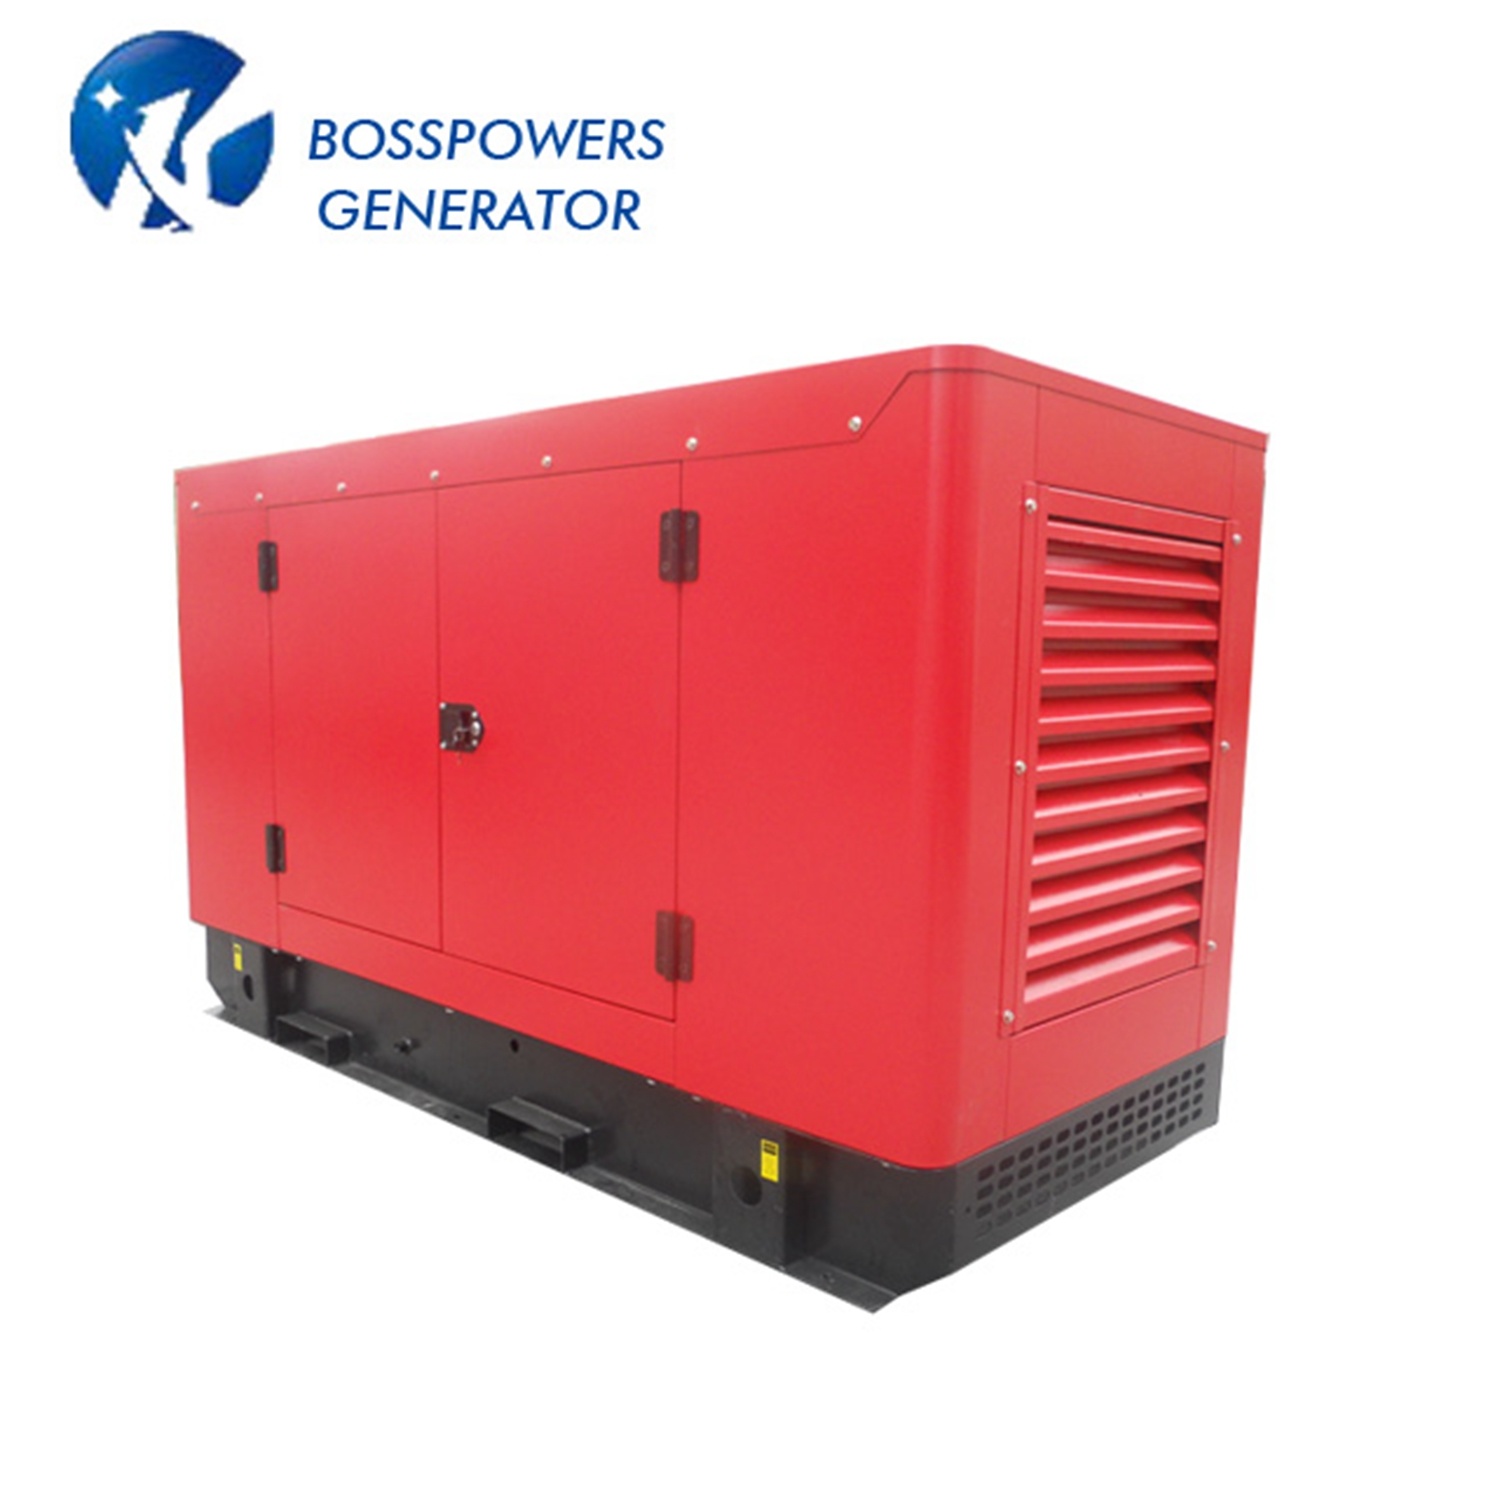 400kVA Diesel Generator Base Fuel Tank Powered by 2206A-E13tag5